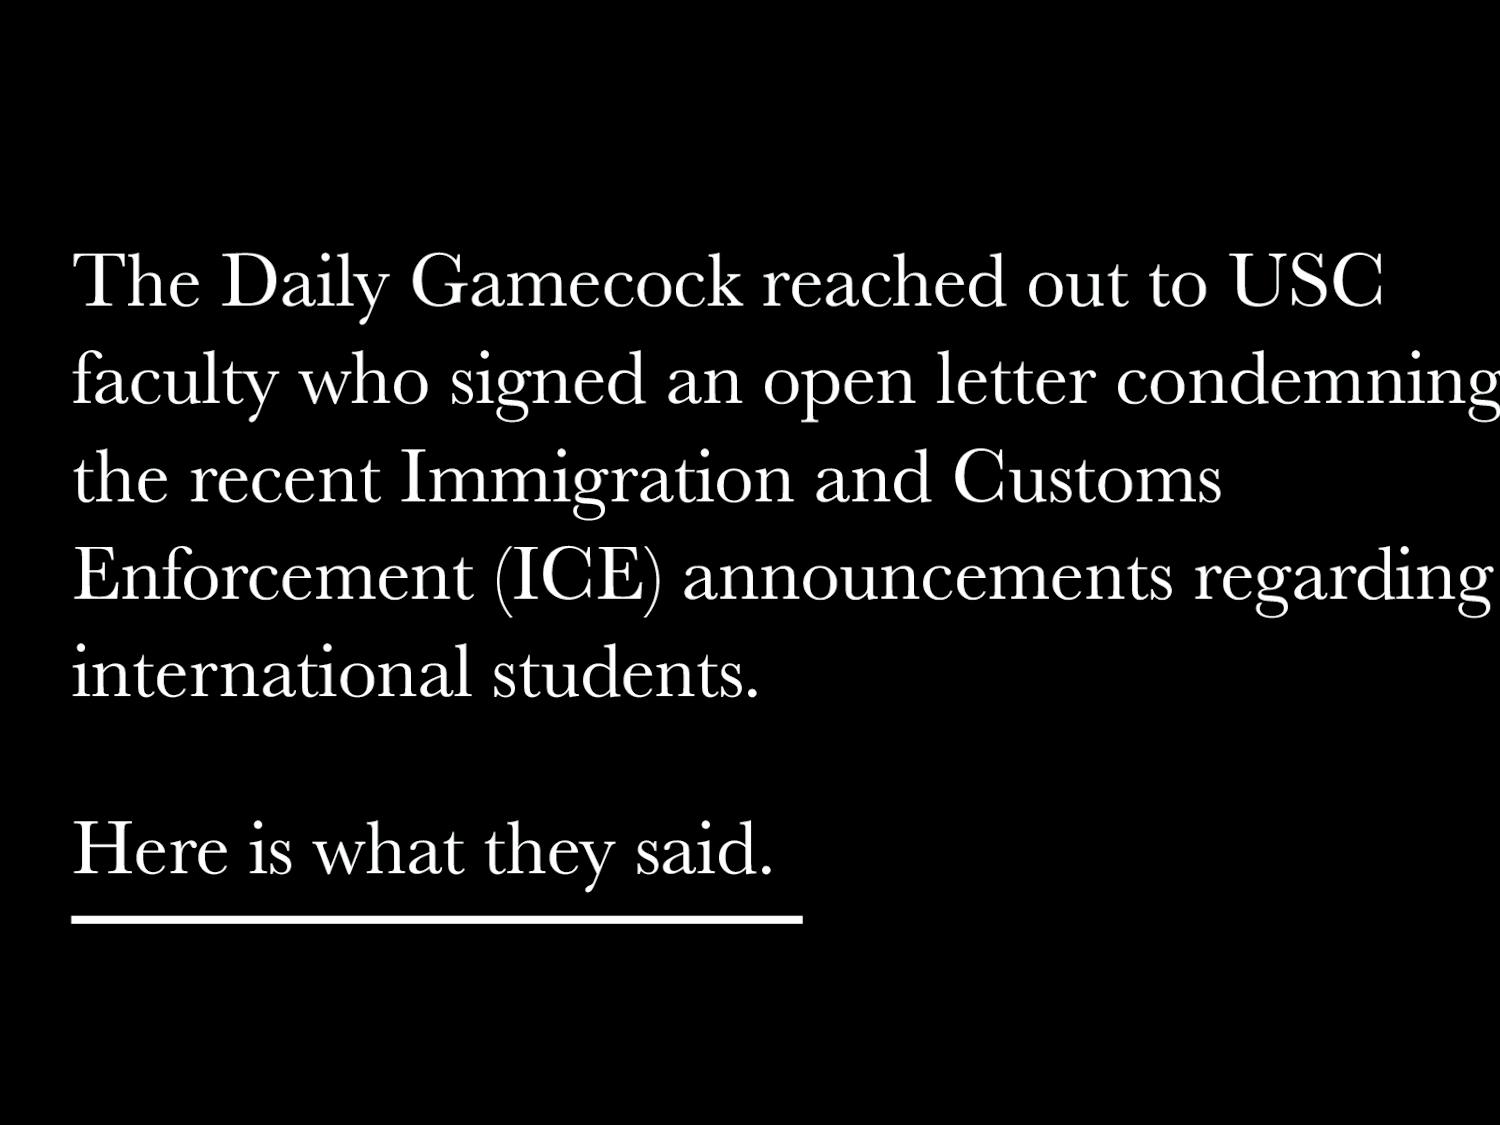 An open letter condemning ICE's latest guidelines regarding international students has amassed over 33,000 faculty signatures, including approximately 175 from USC. Here is what they had to say.